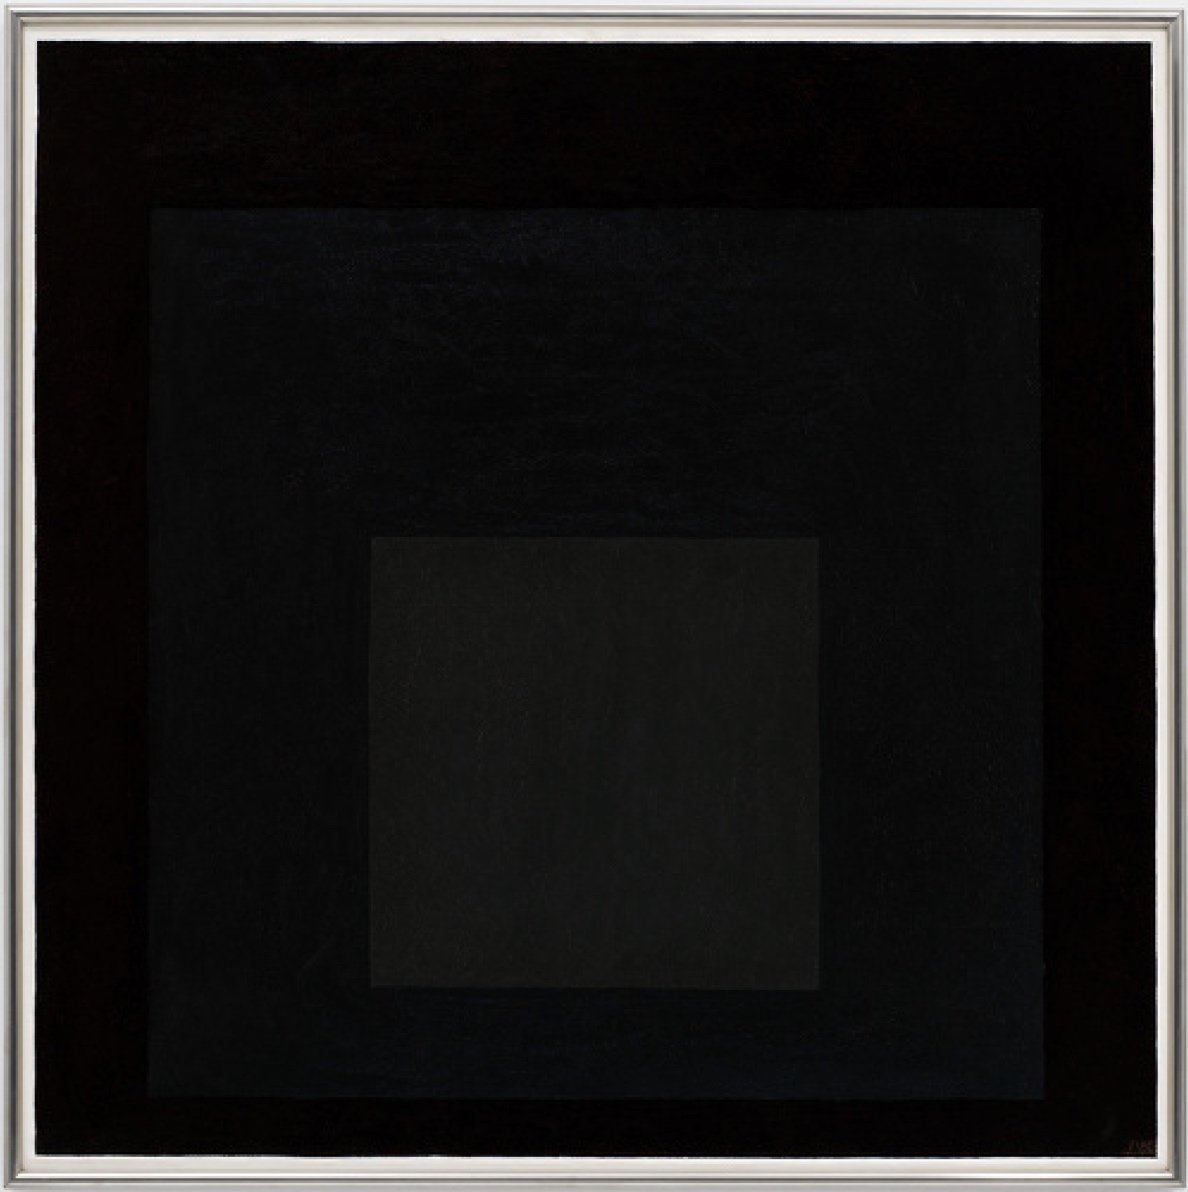  Josef Albers,  Homage to the Square , 1965 